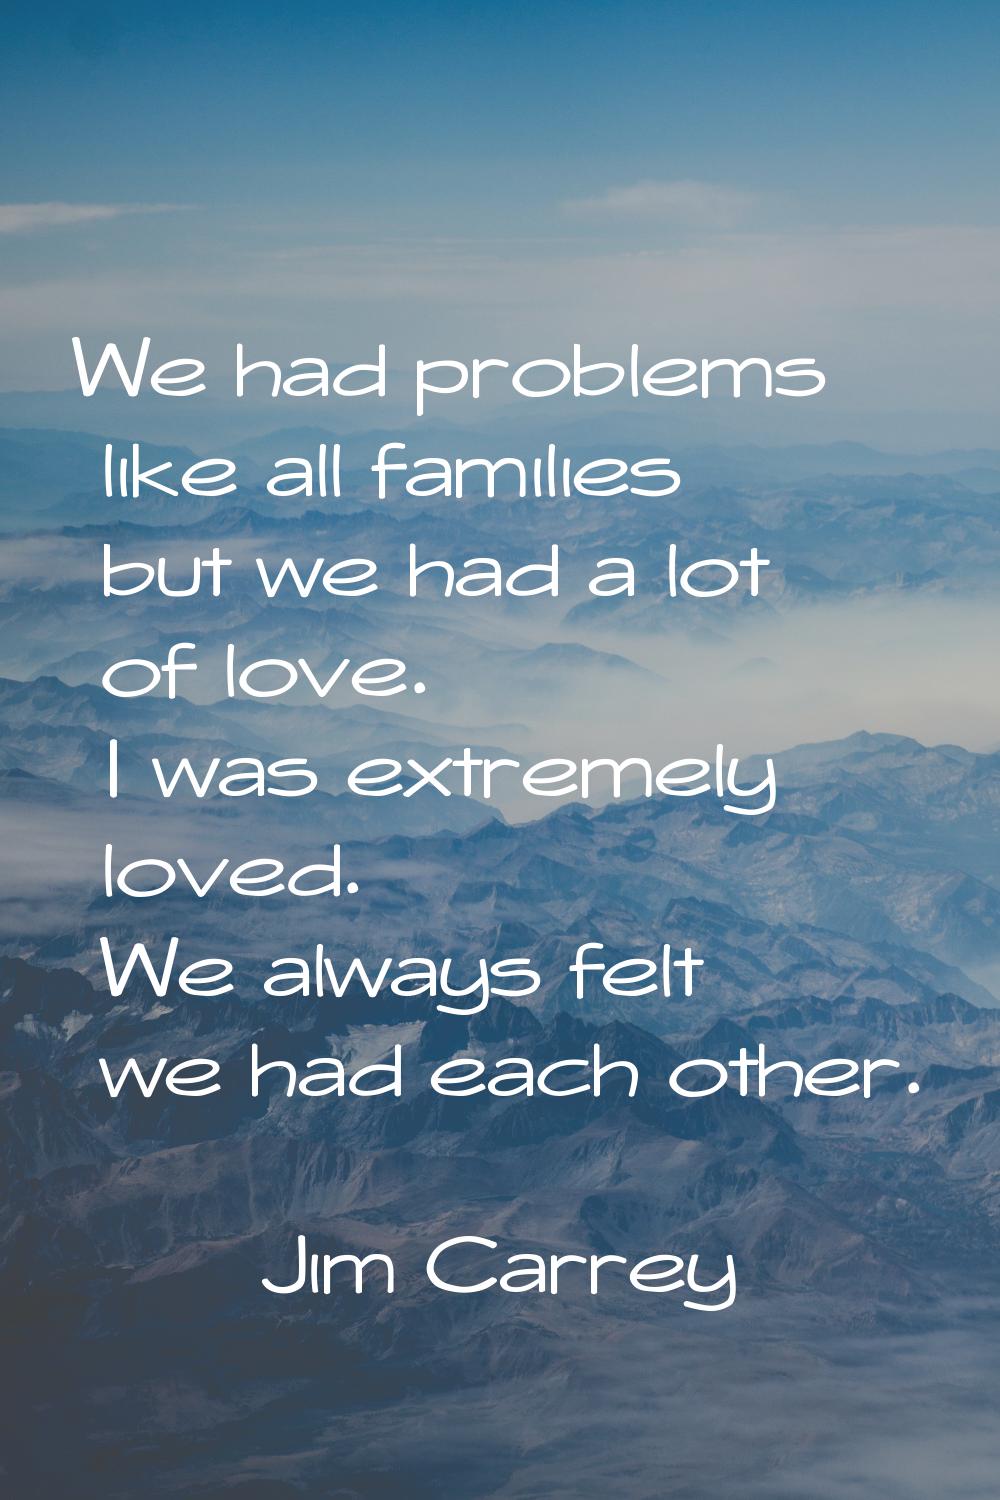 We had problems like all families but we had a lot of love. I was extremely loved. We always felt w